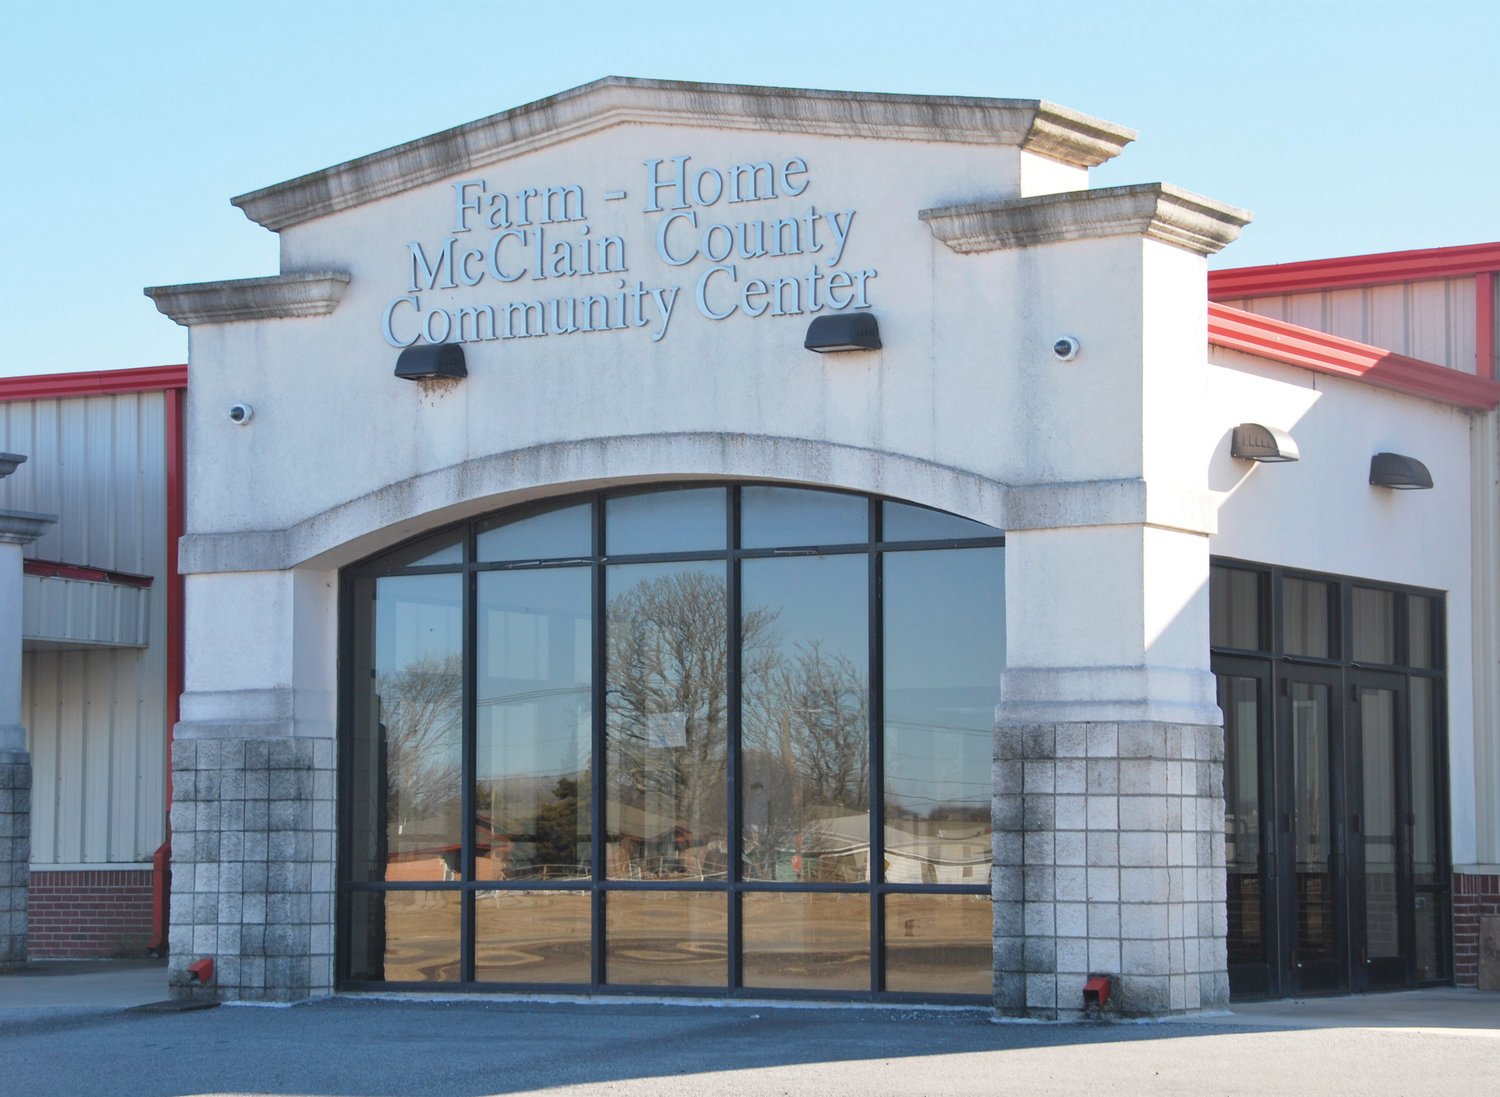 The McClain County Farm-Home Community Center, 1721 Hardcastle Boulevard, is where McClain County voters will cast early ballots from now on. That’s the word from Election Board Secretary Karen Haley. A bigger room to accommodate more voters and ample parking have moved the early ballot casting from the election board to the Community Center for elections starting next month.